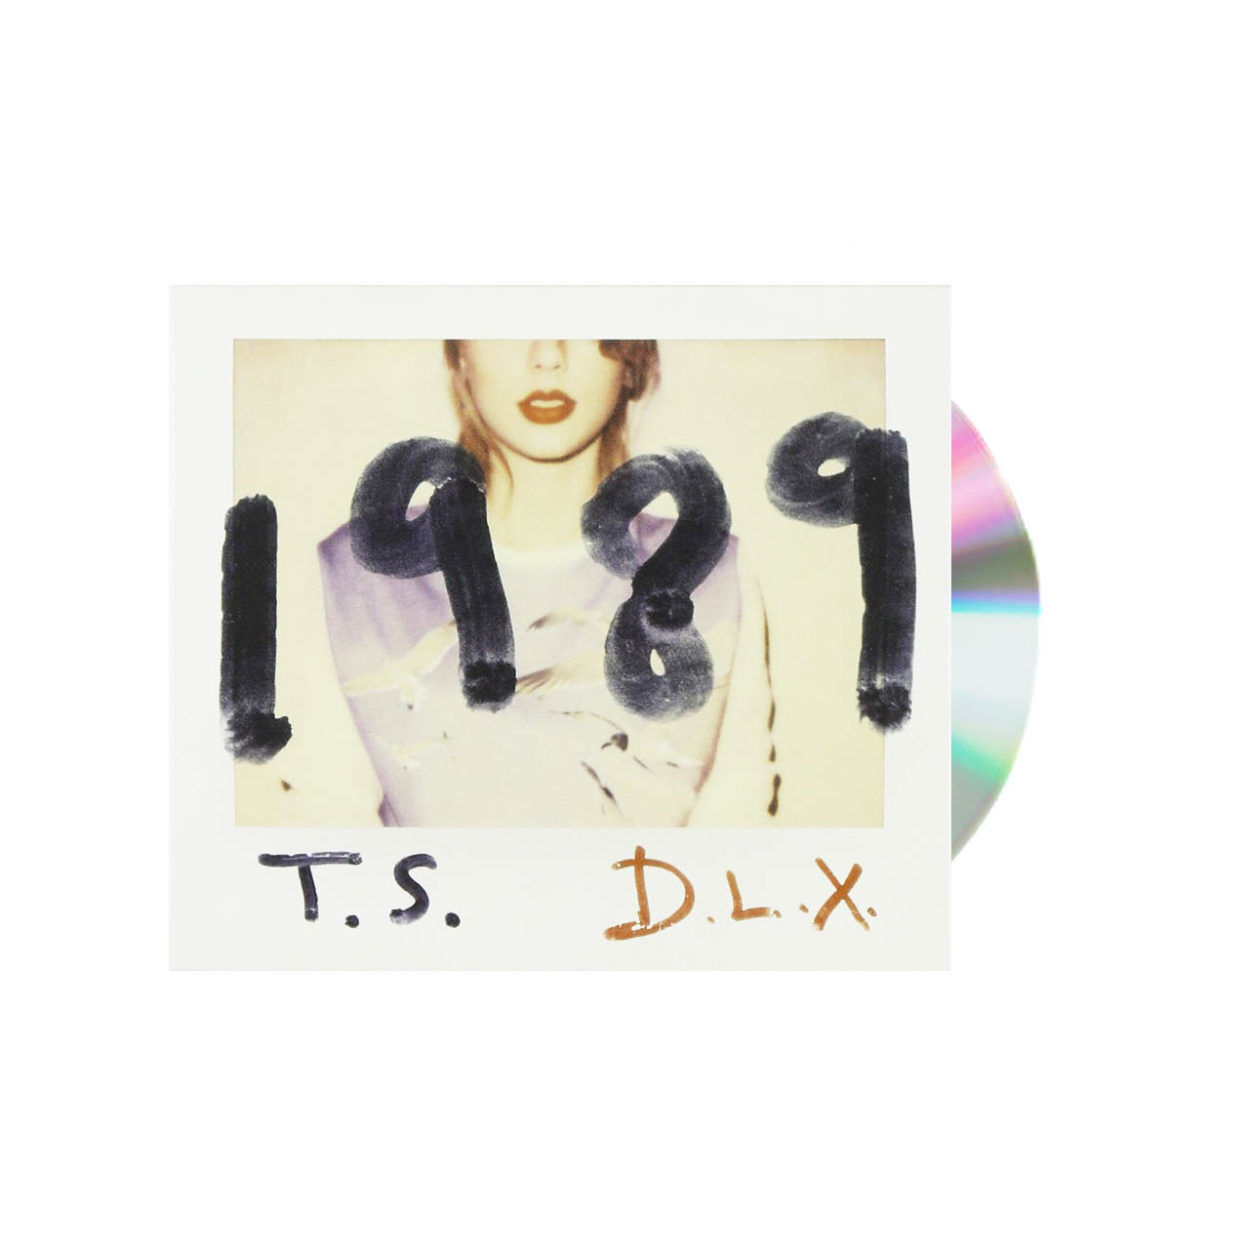 Taylor Swift 1989 CD Deluxe